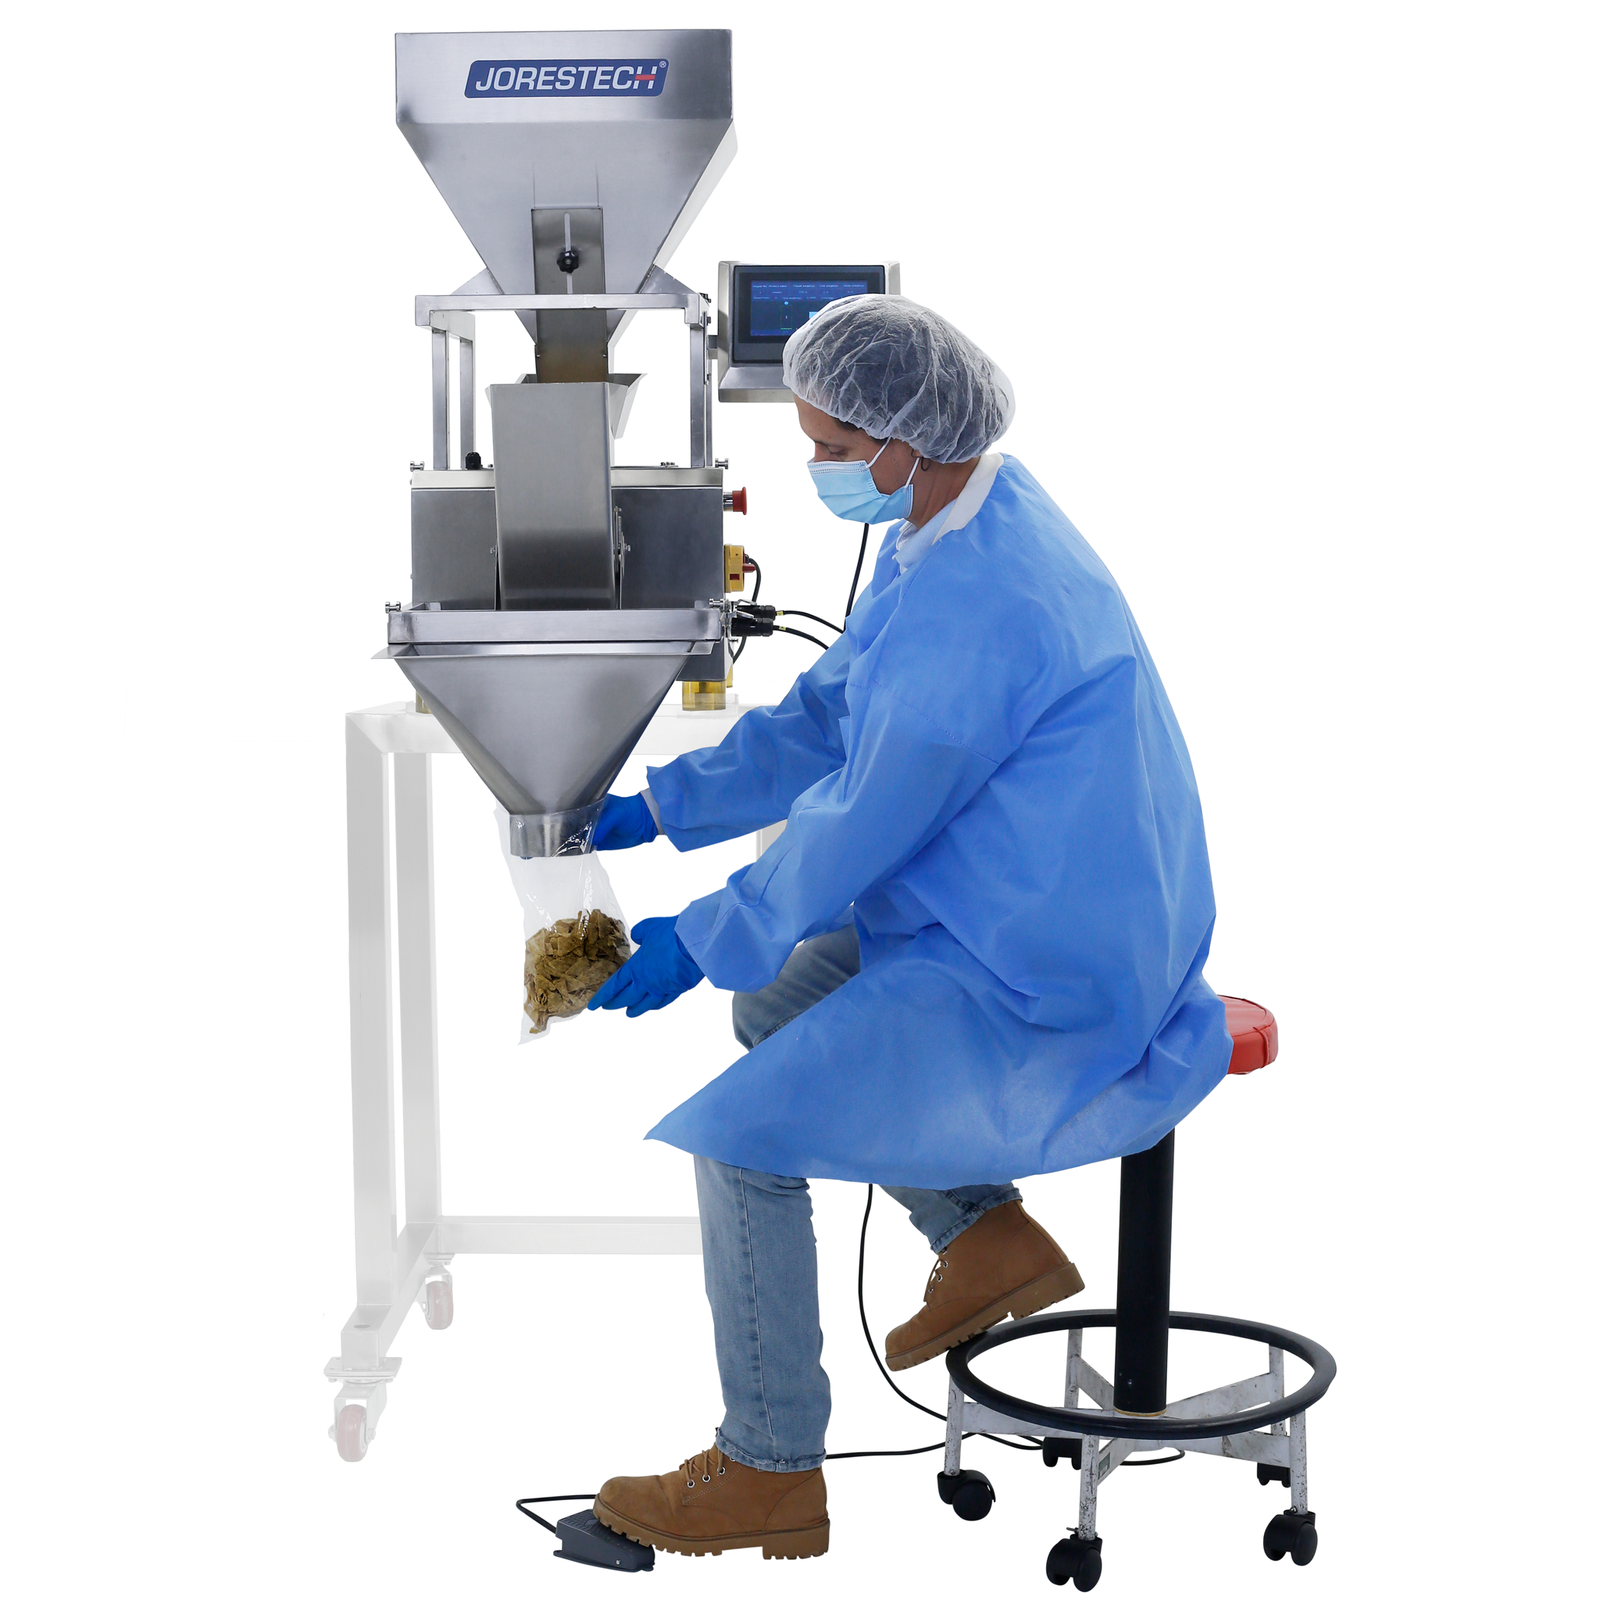 operator using the foot pedal to command the JORES TECHNOLOGIES® linear weighing machine to dispense product into a bag. The machine can be seen placed on top of a stand, specifically built for this machine, which can be optionally purchased.